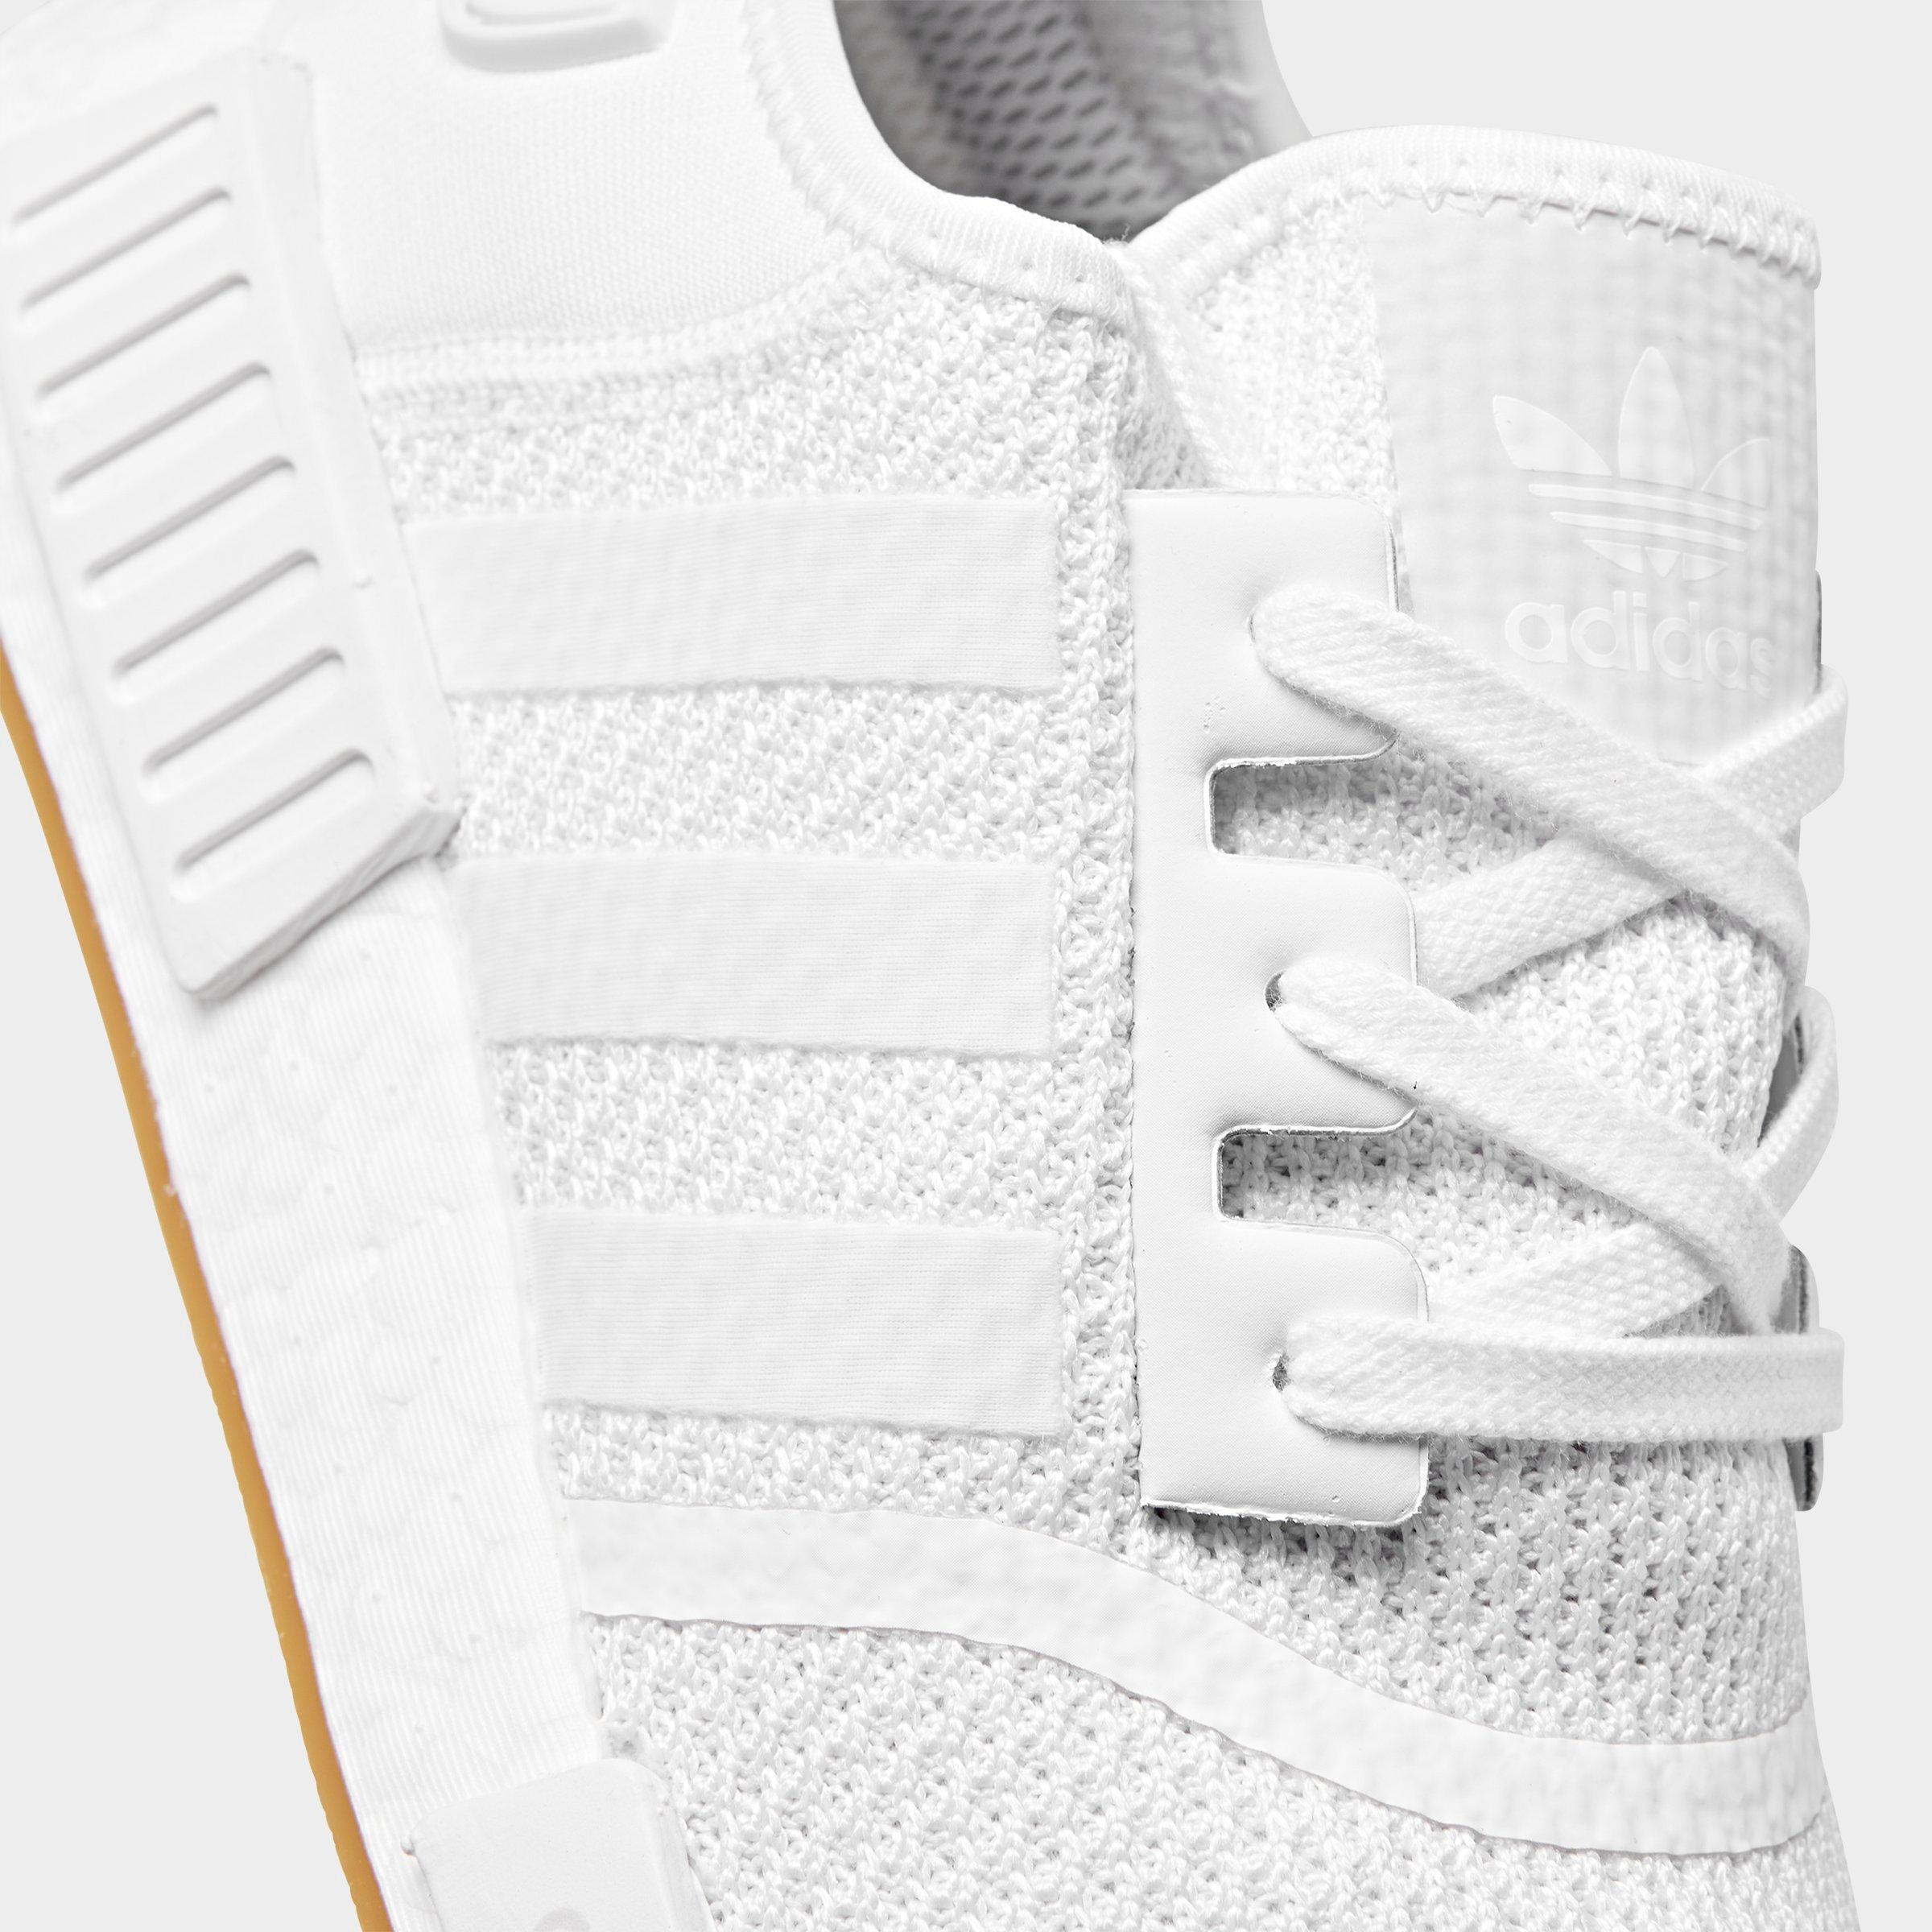 women's adidas nmd r1 primeknit casual shoes